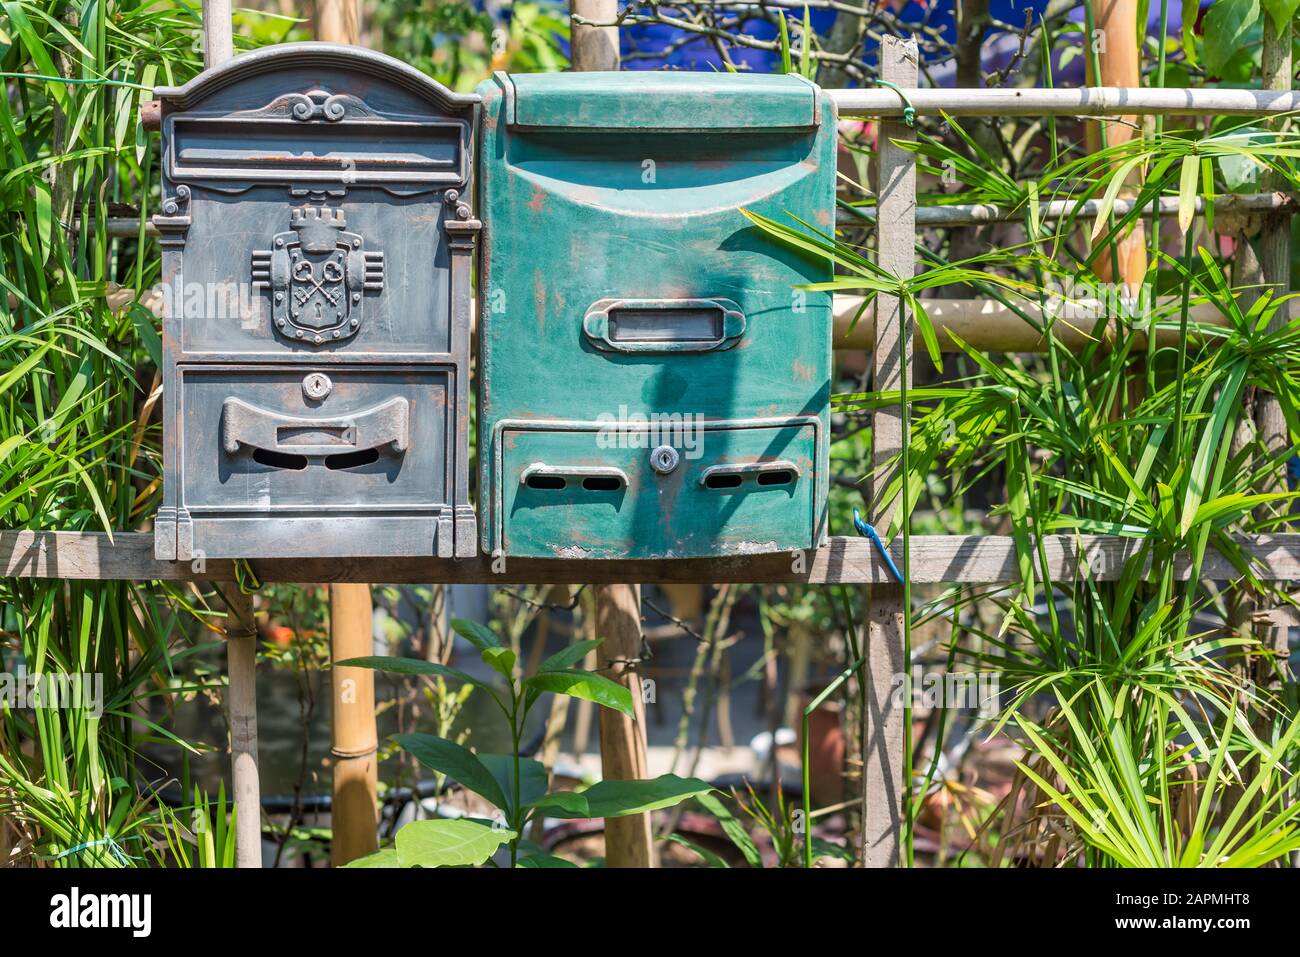 A green and a grey old mailbox on a fence against vegetation Stock Photo